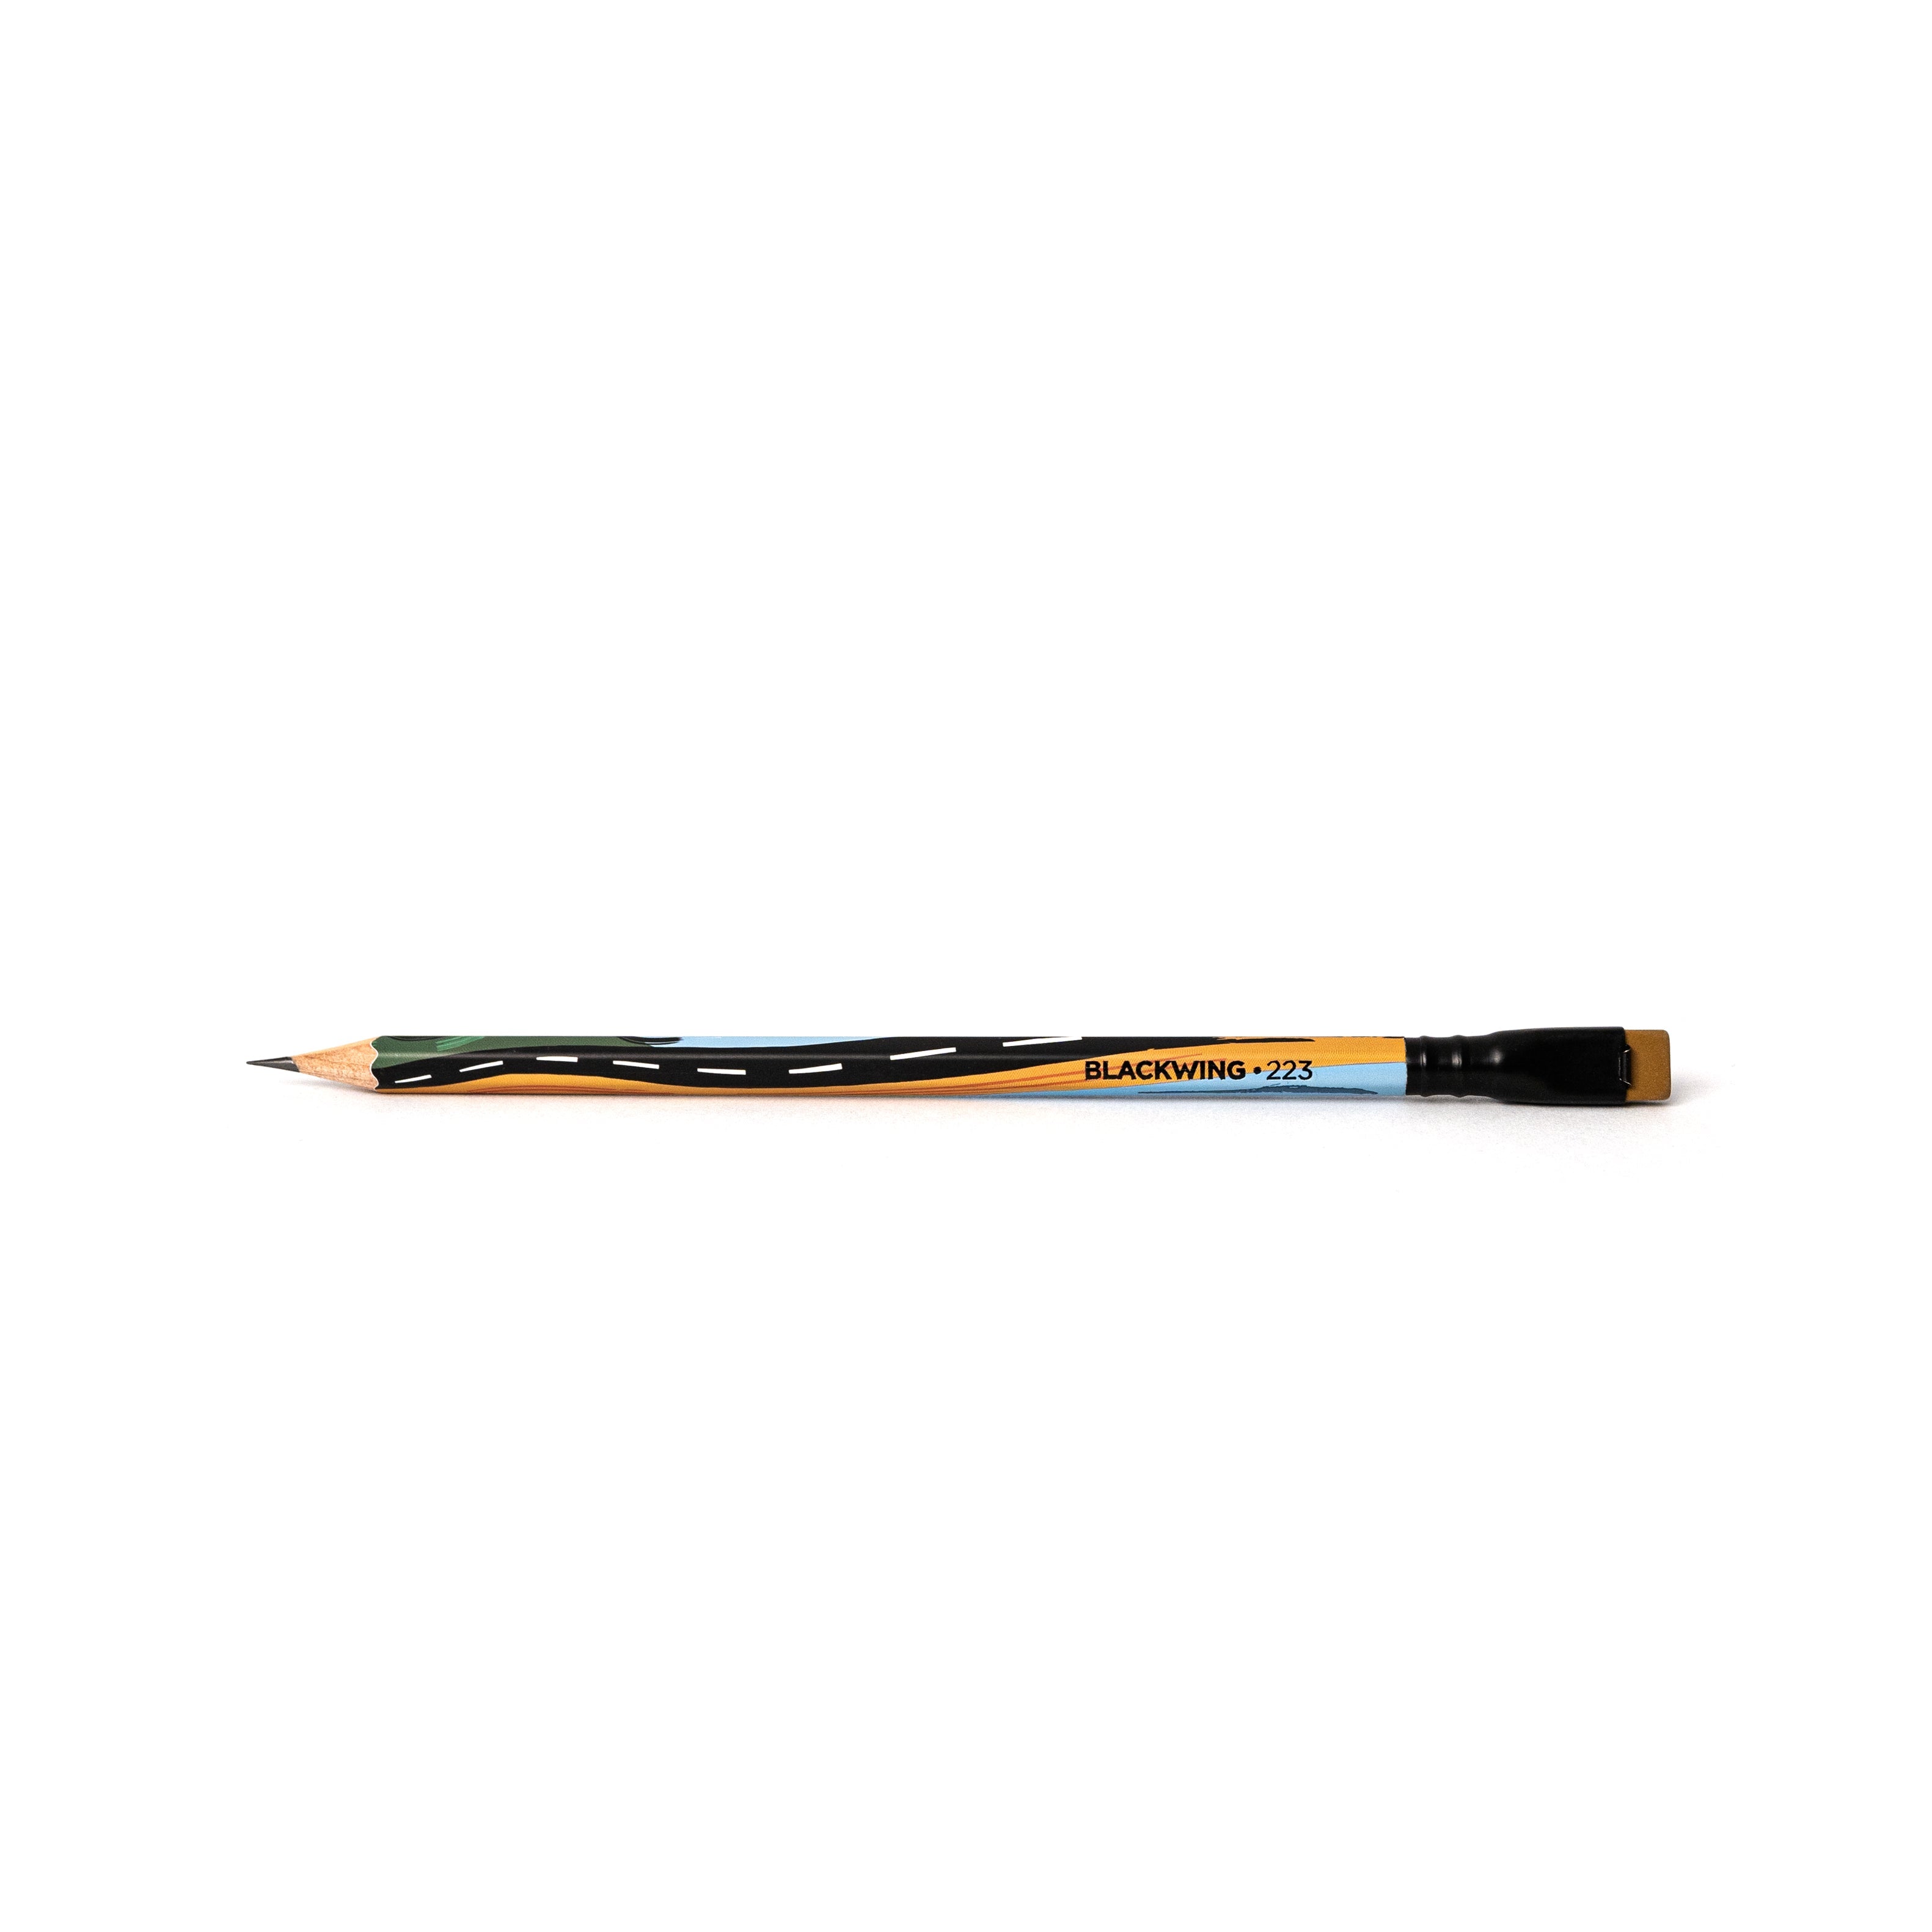 Three Blackwing Volume 223- Tribute to Woody Guthrie (Set of 12) pencils, inspired by Woodie Guthrie&